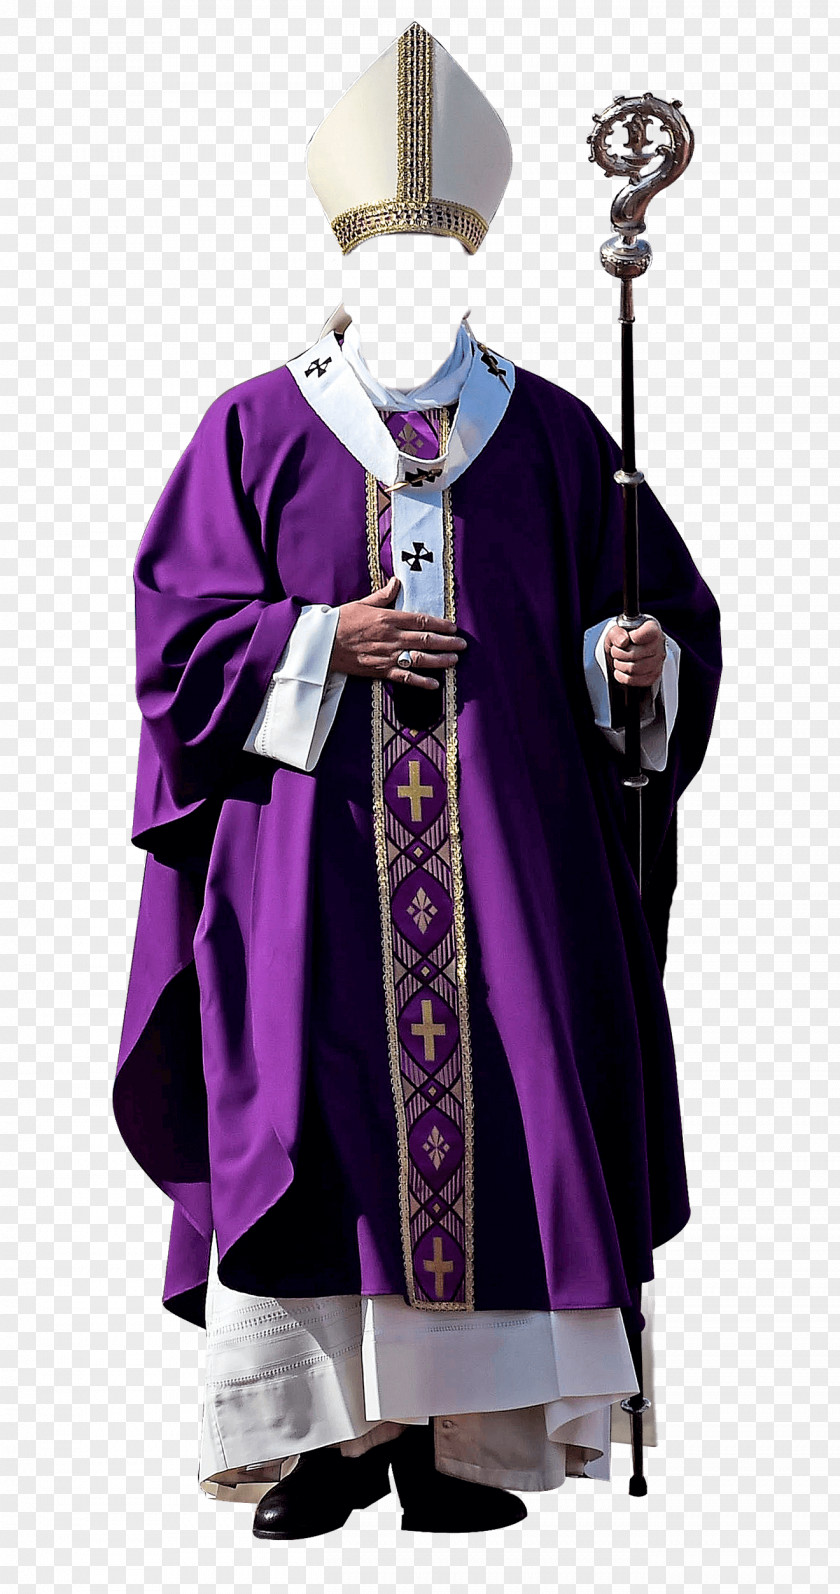 Dress Clothing Pope Tunic Priest PNG